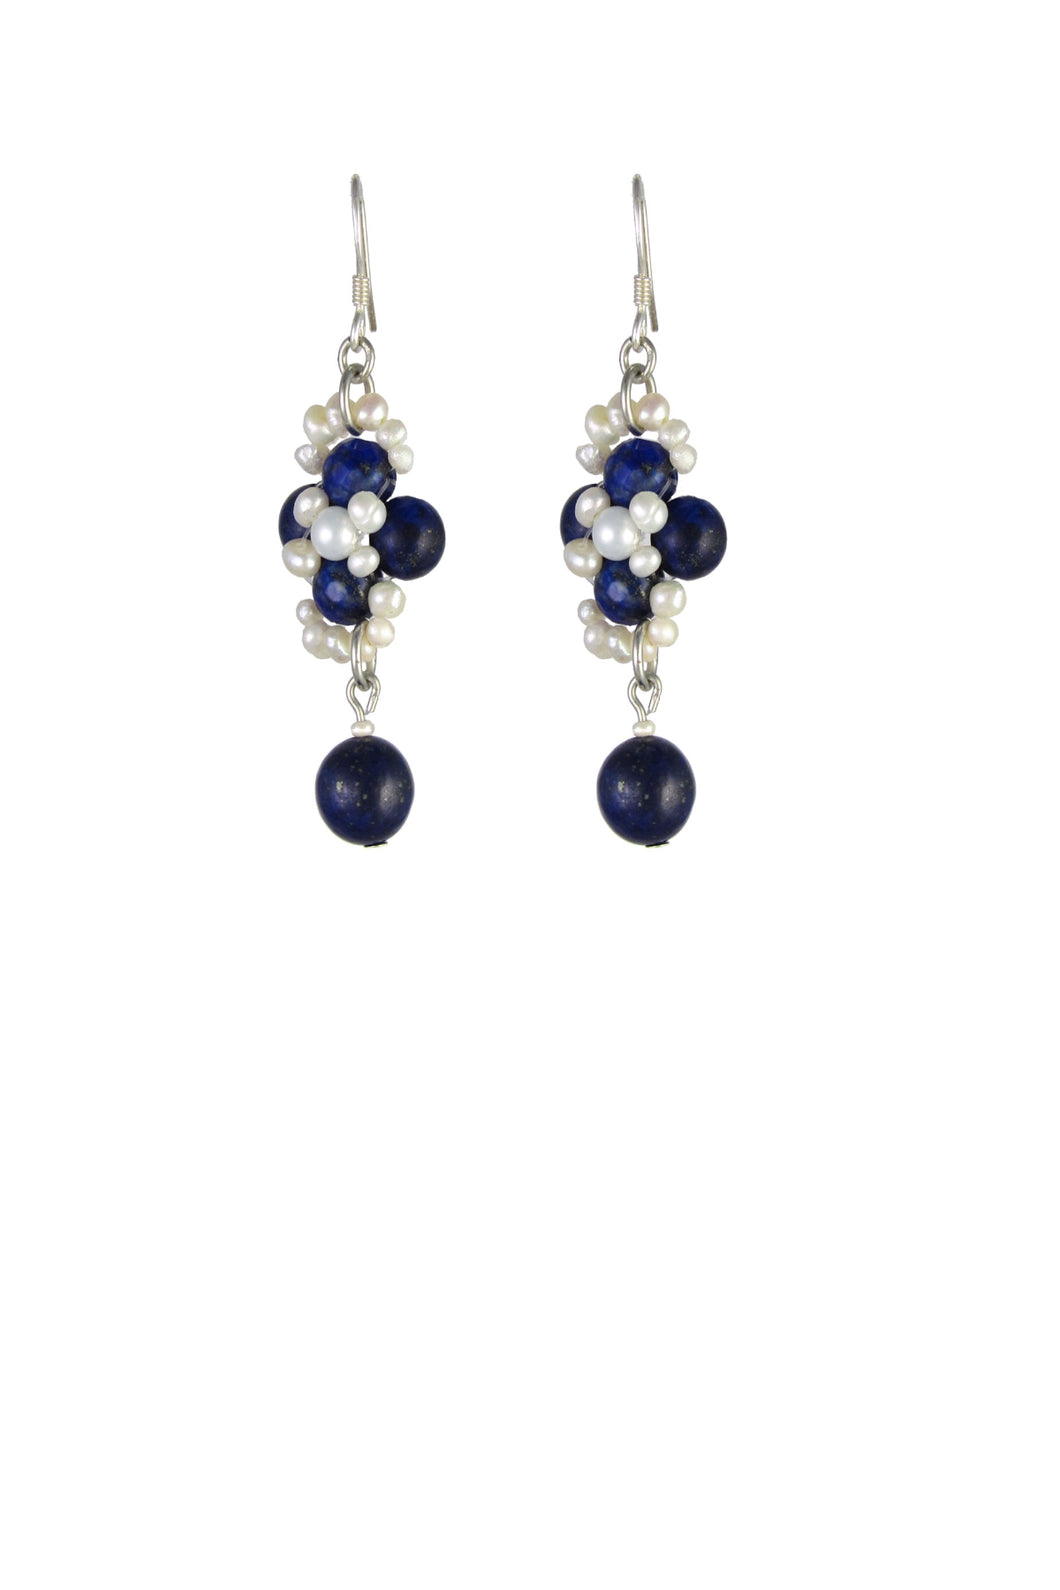 Lapis and Freshwater Pearls Rex Sterling Silver Earrings